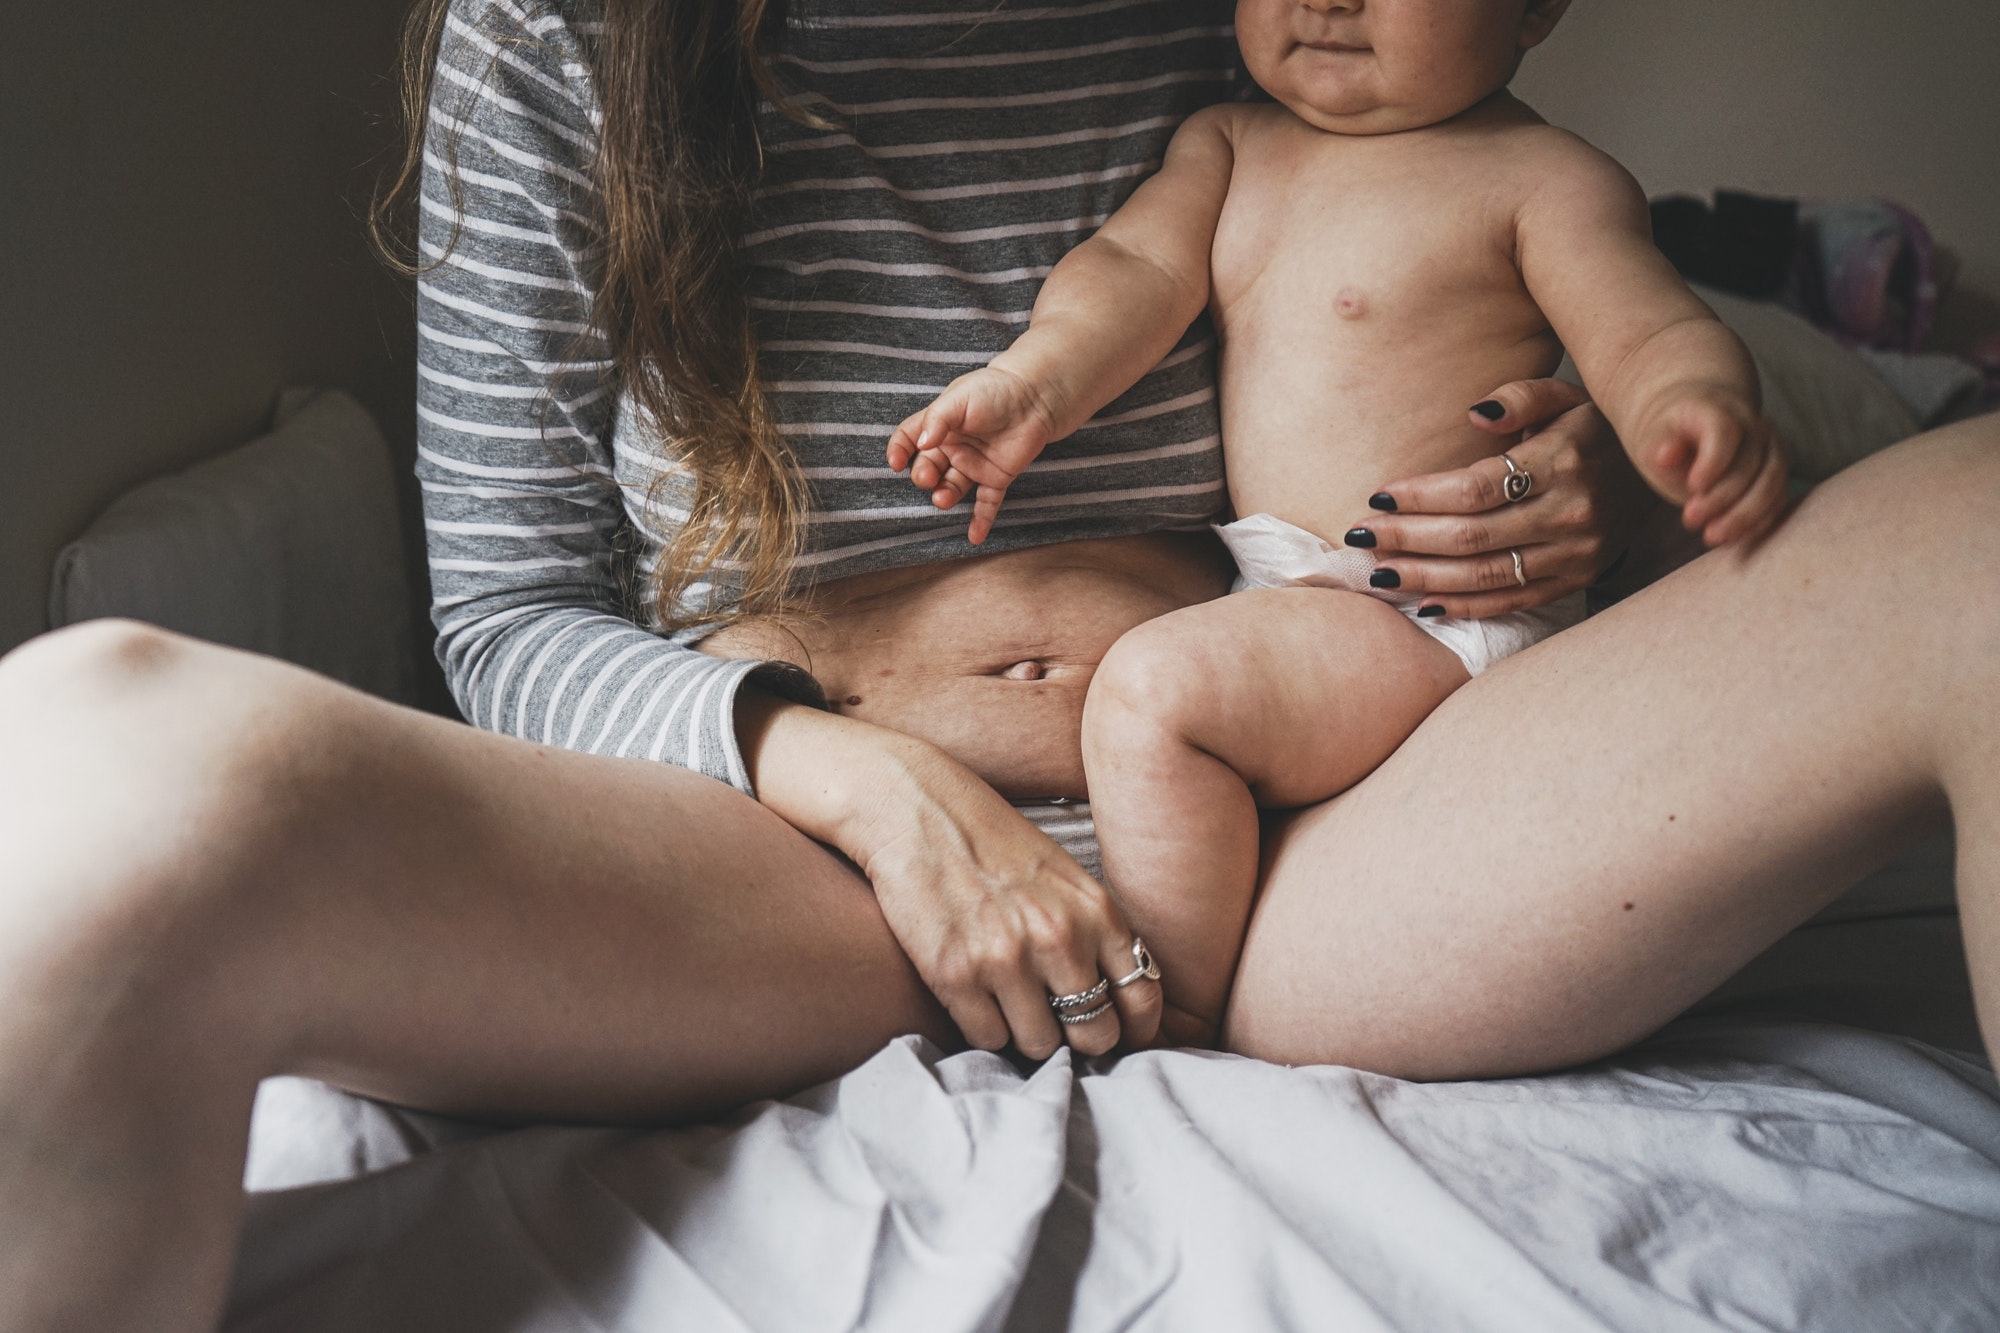 Real image of a woman and her baby at postpartum recovery